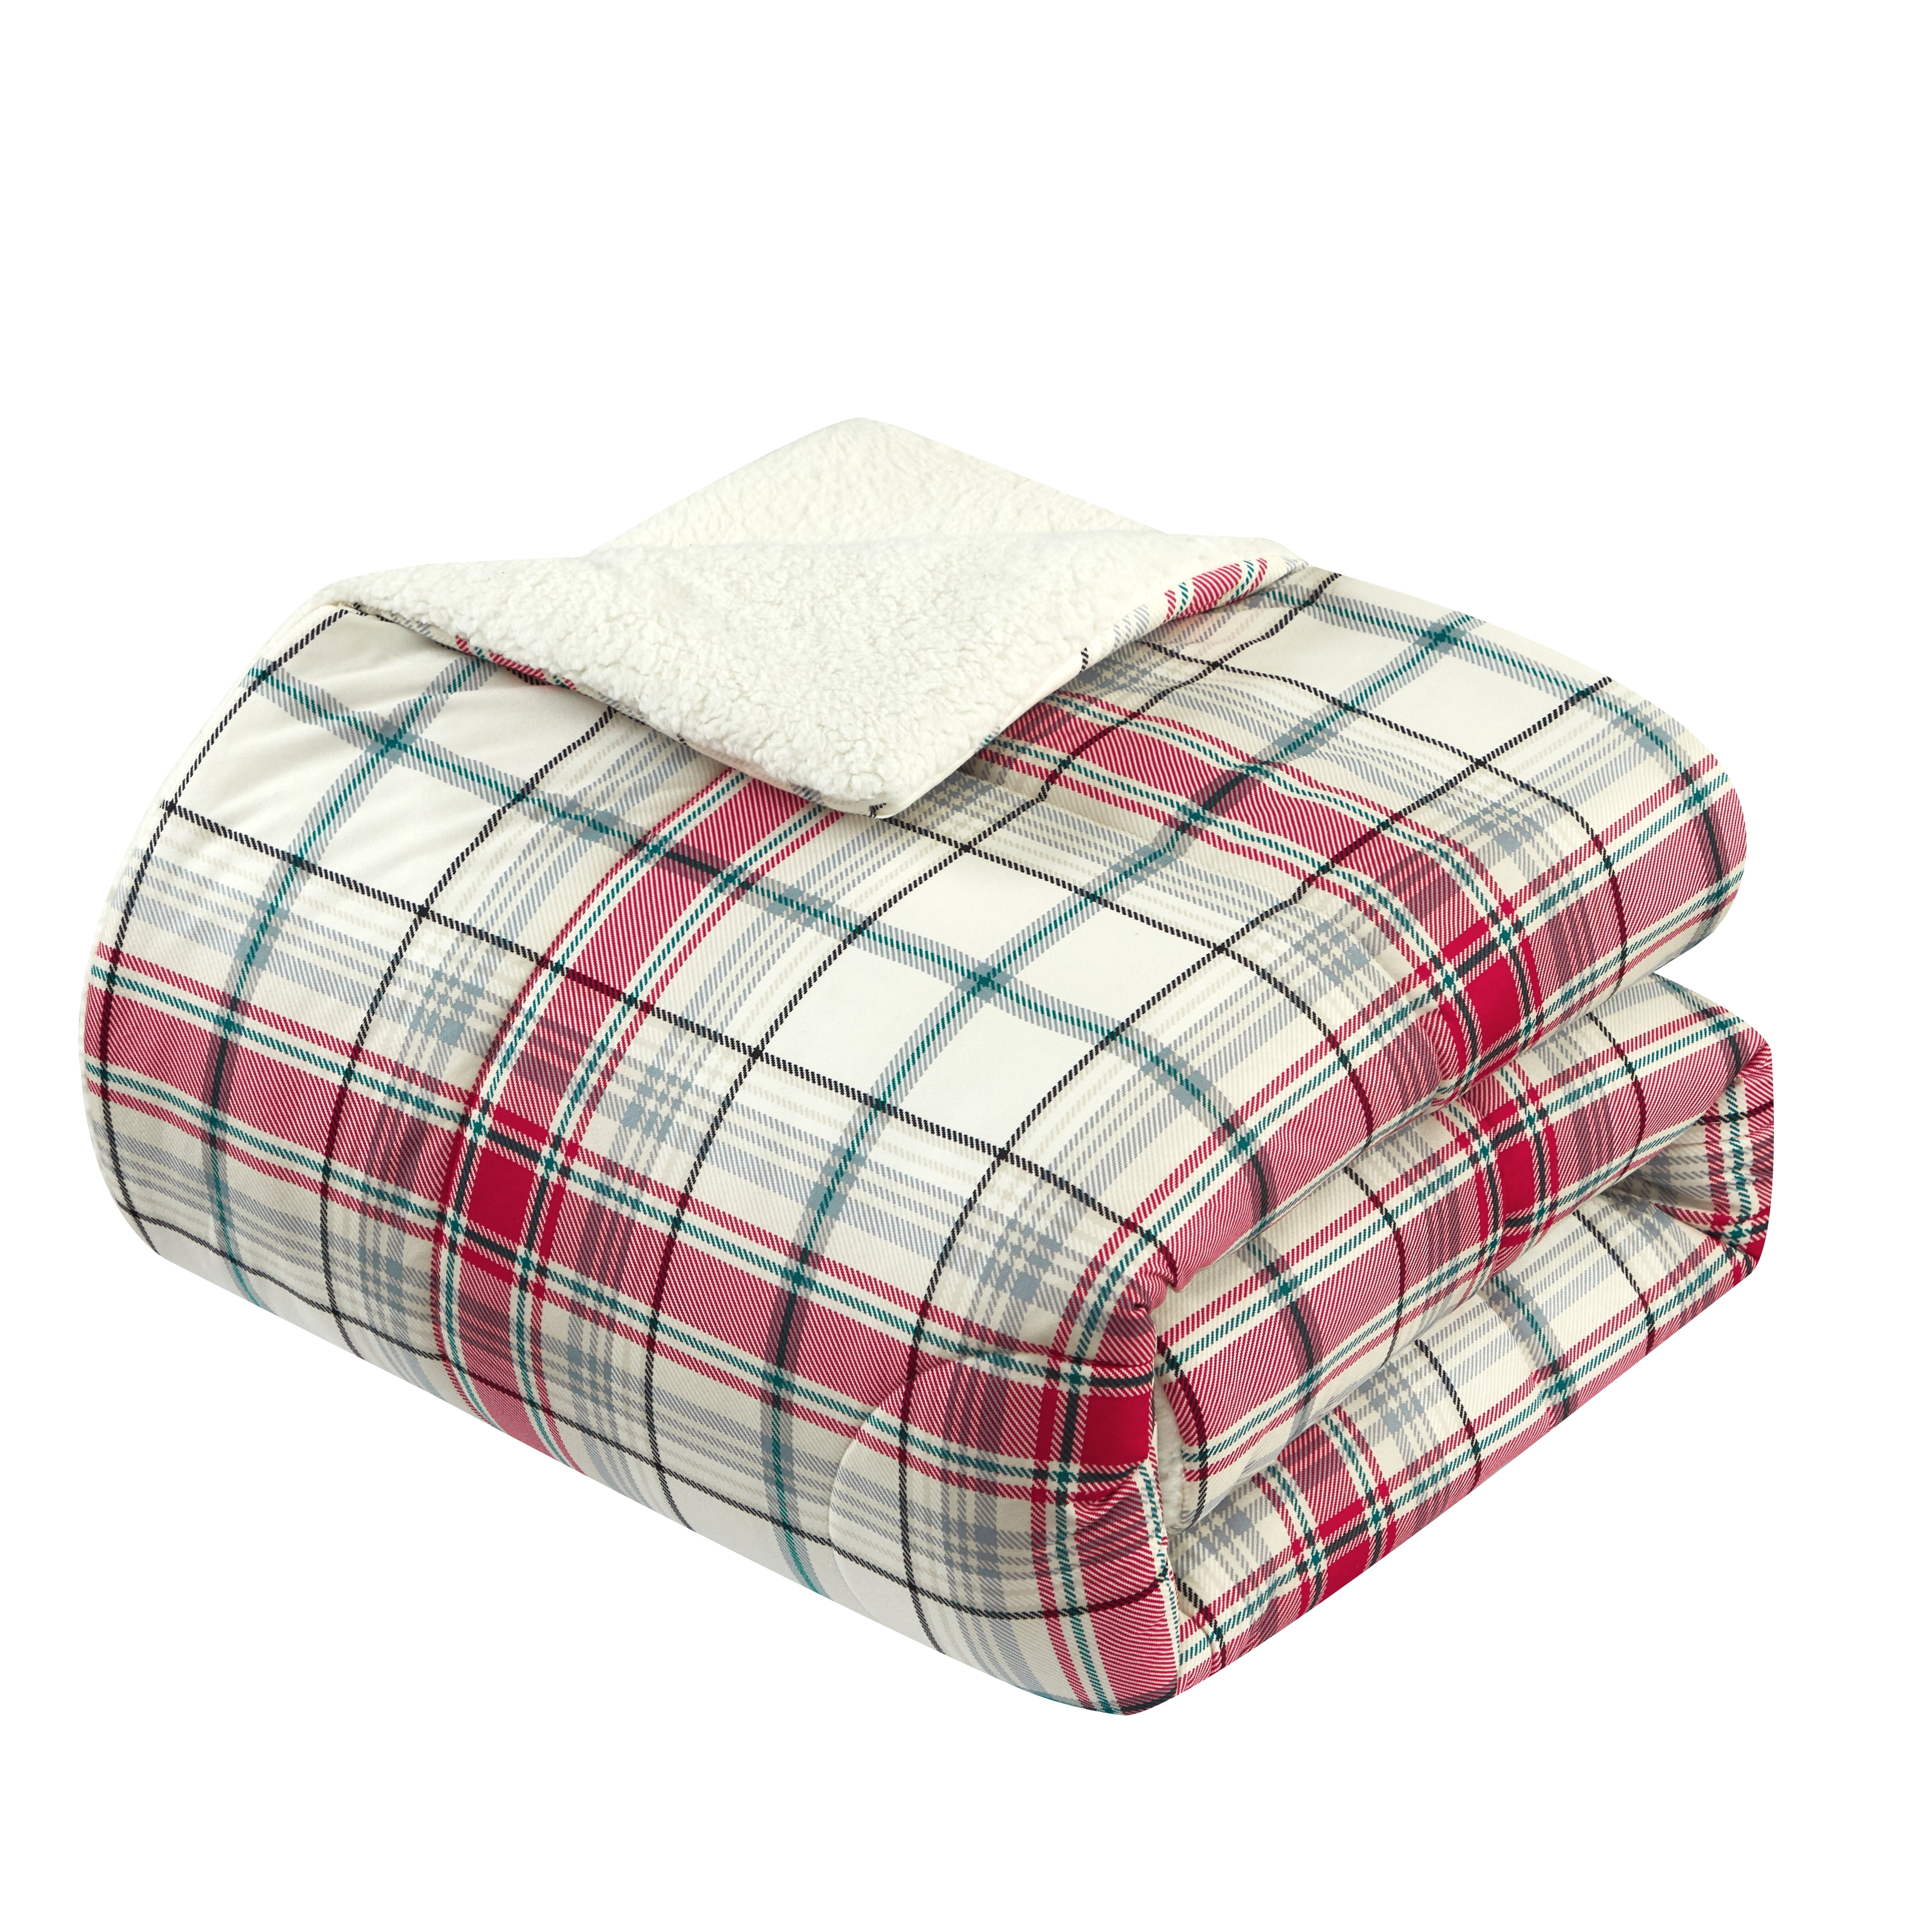  Swift Home Luxurious Ultra-Soft Flannel Plush Plaid & Sherpa 3  Piece Reversible Comforter and Sham Set, Harper, King/Cal King (106x94),  Red : Home & Kitchen